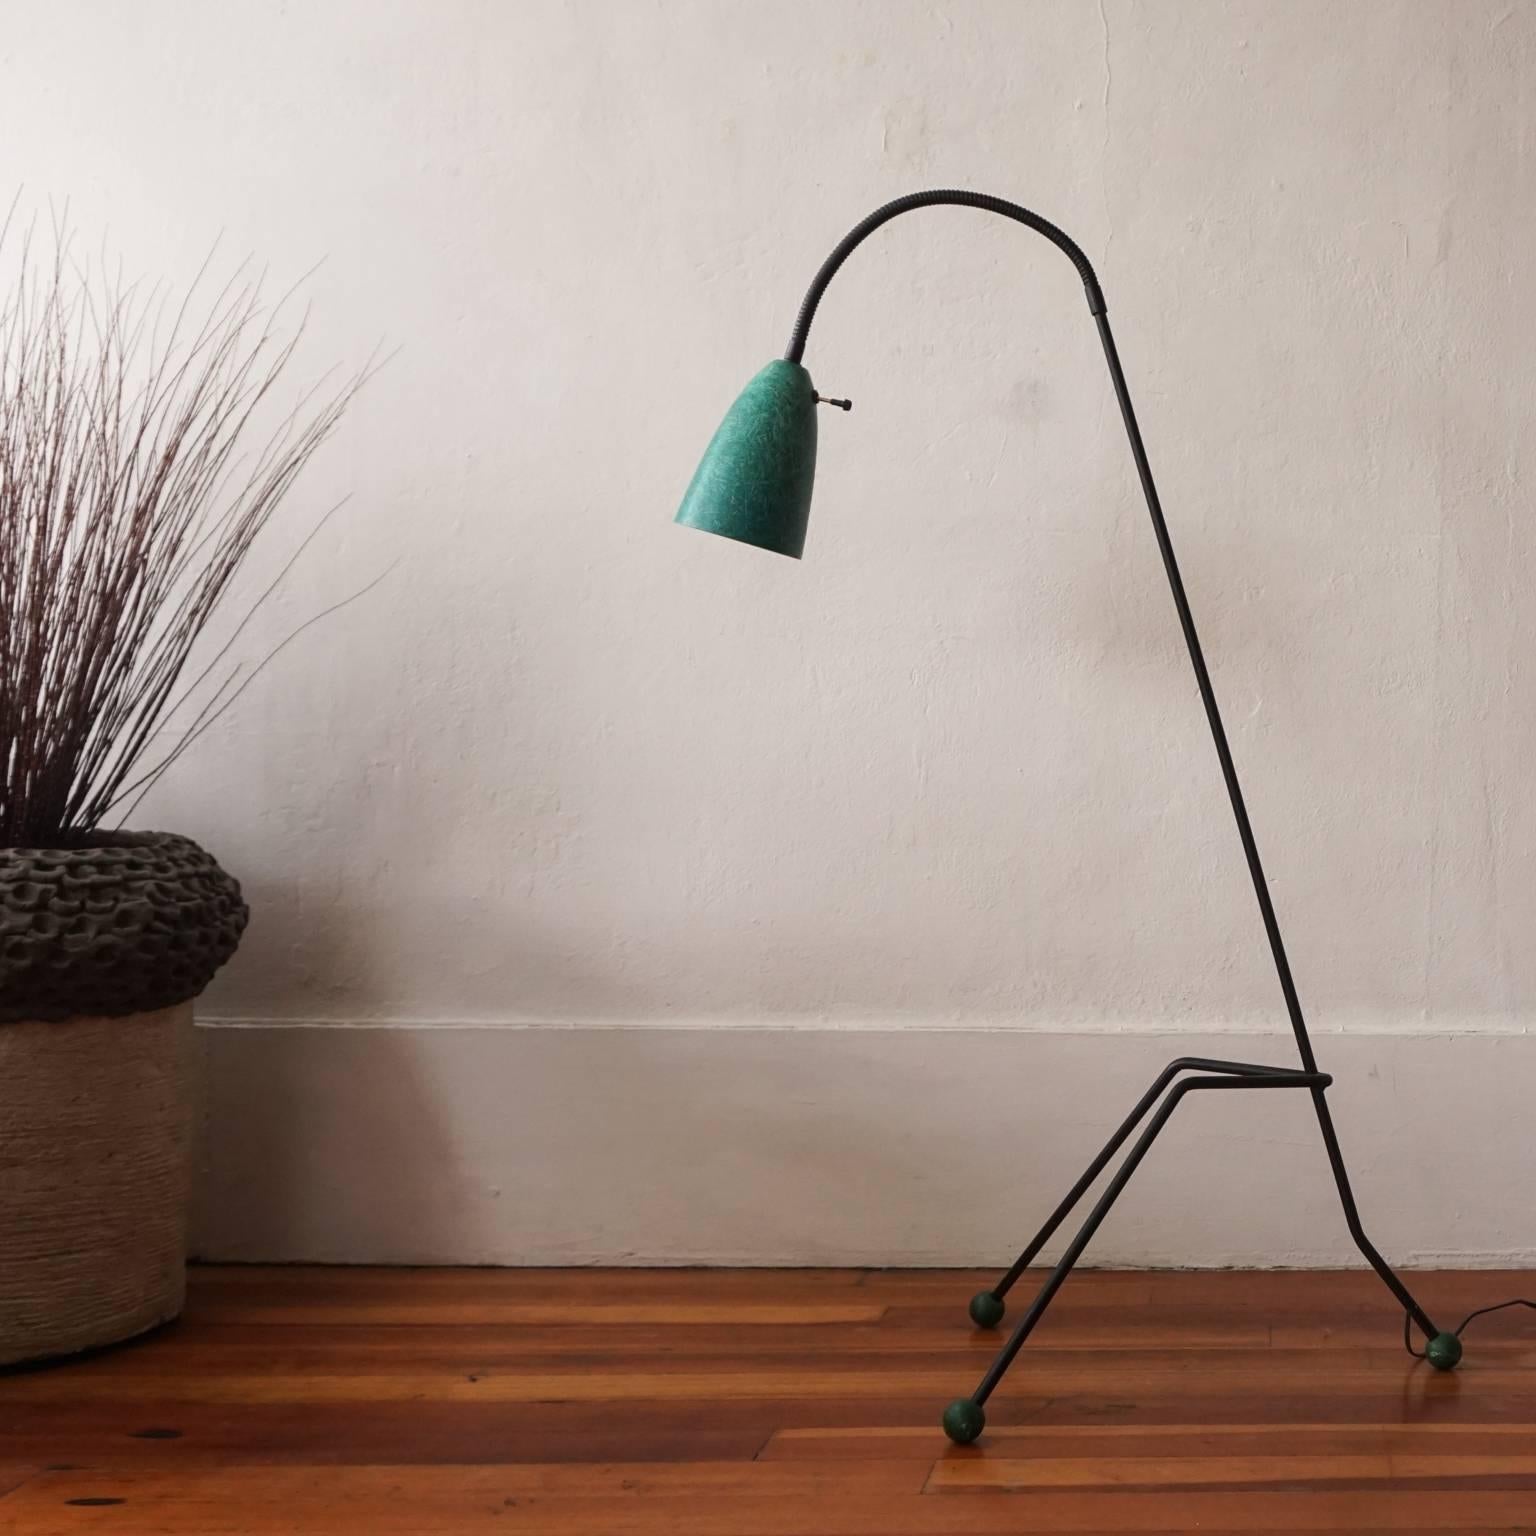 1950s, iron and green fiberglass floor lamp. Adjustable shade and wood ball feet in green.